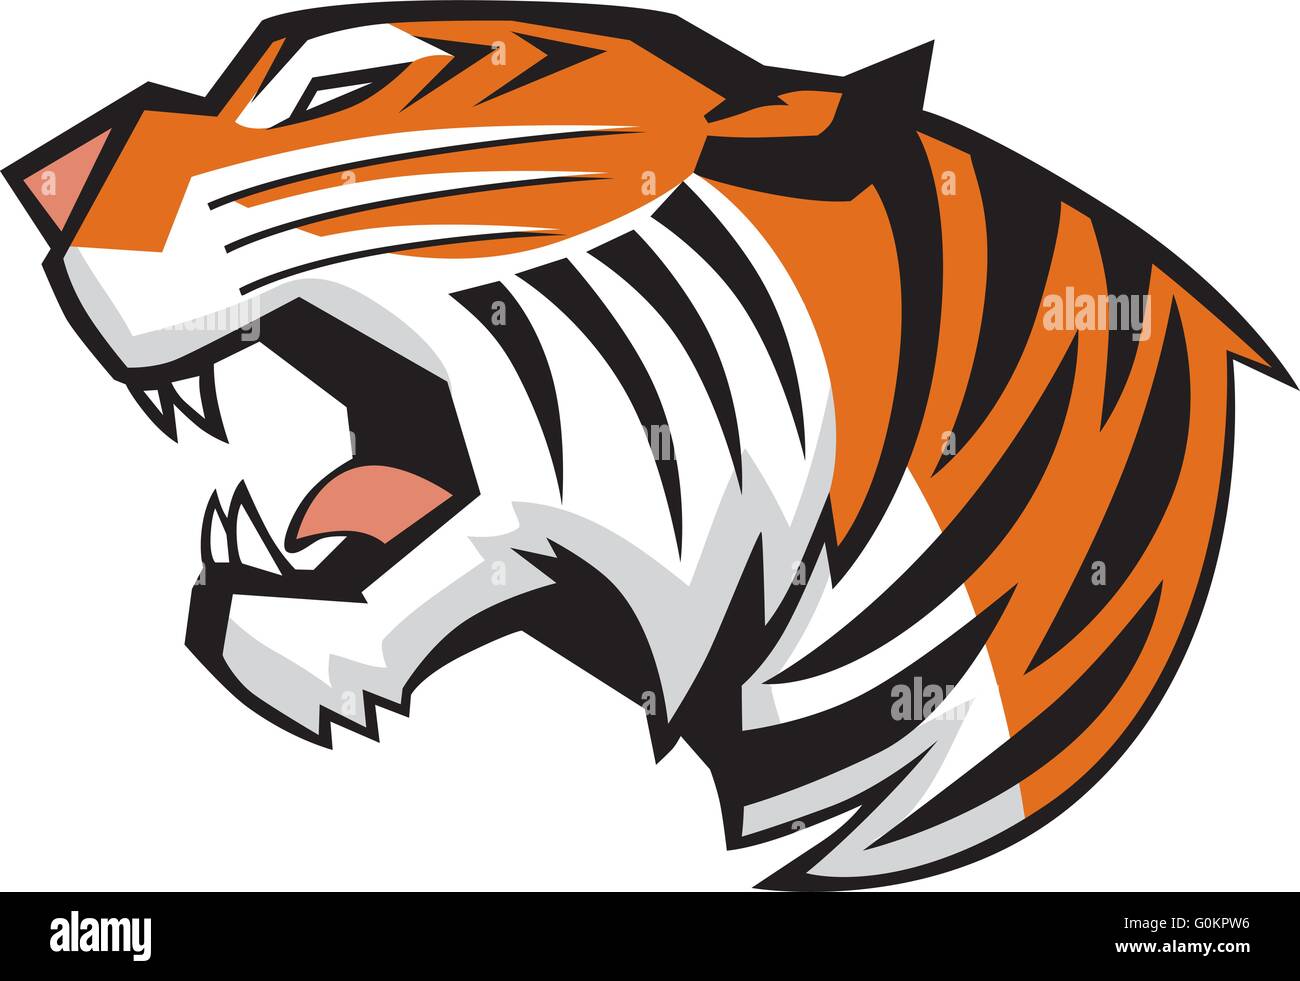 Vector Cartoon Clip Art Illustration of a roaring tiger head in a side view, rendered in a graphic style Stock Vector